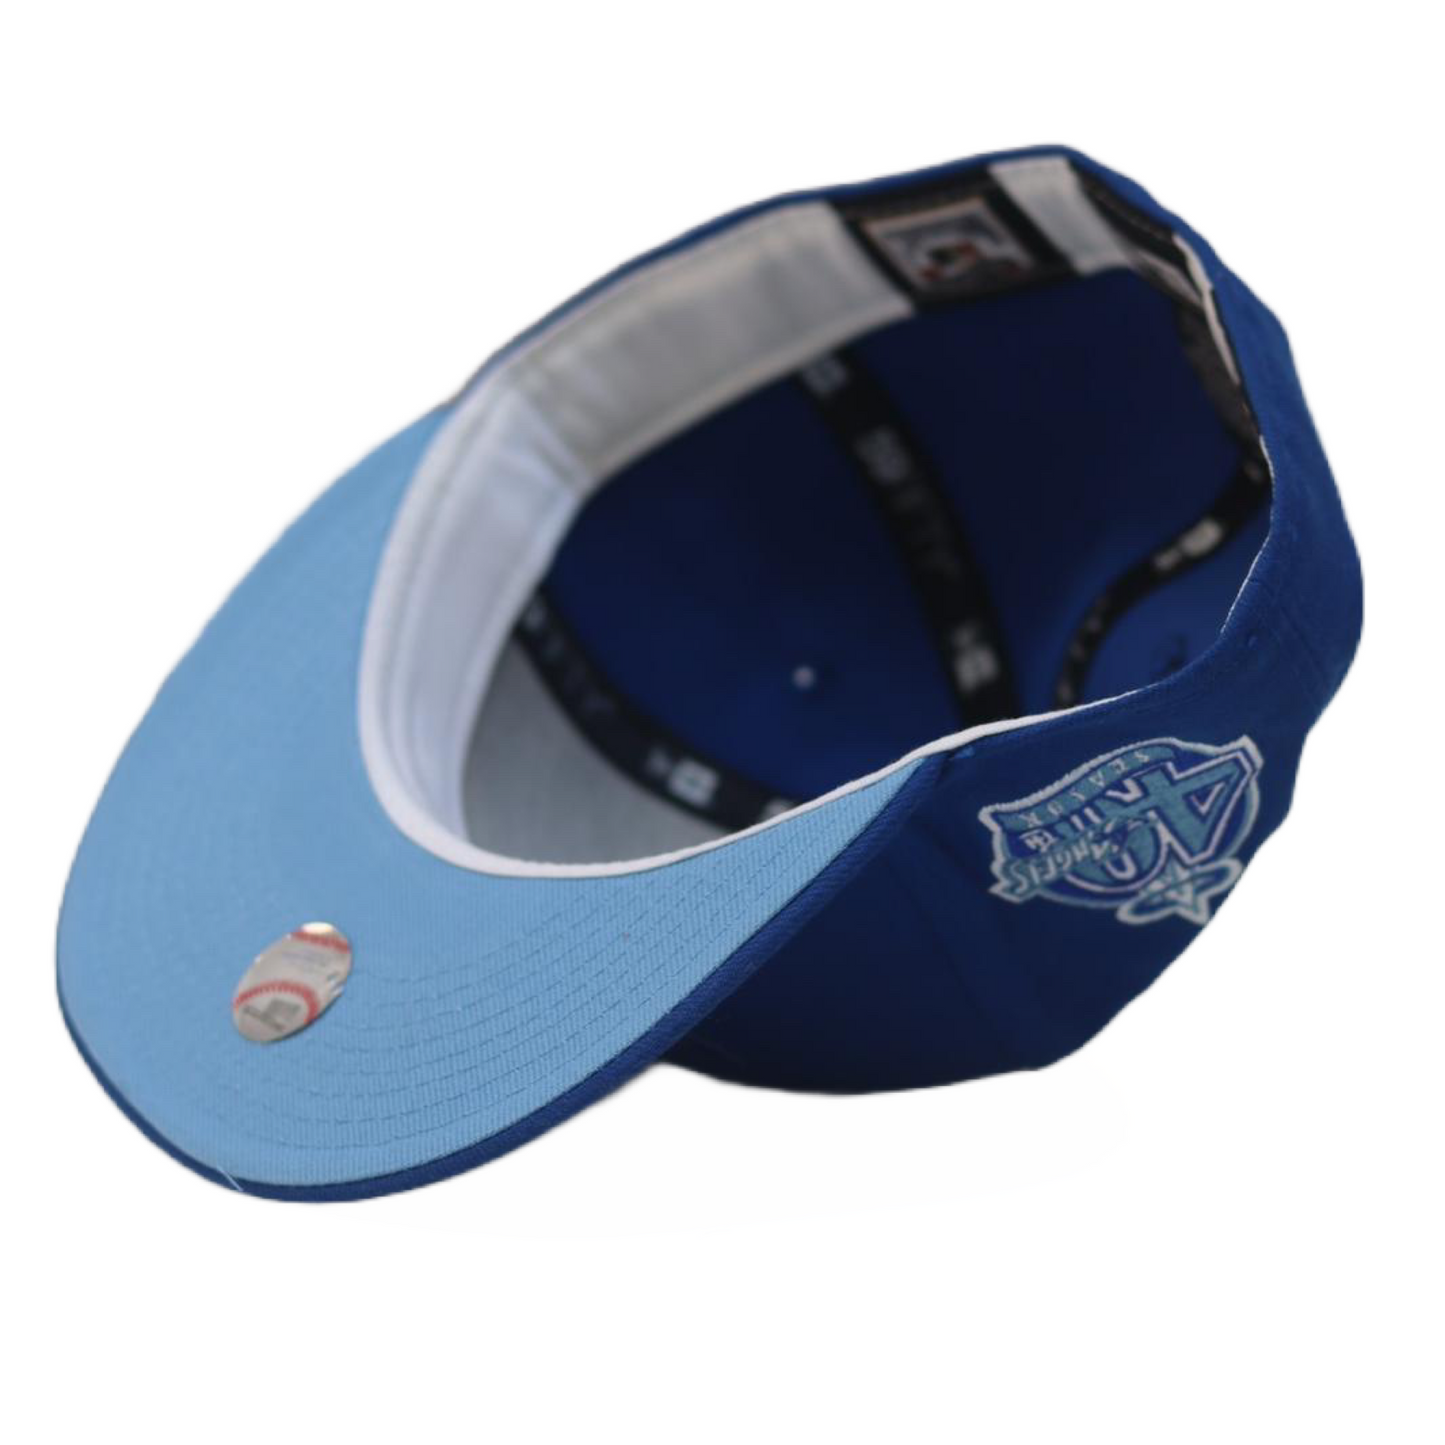 Anaheim Angels “Iceberg” Exclusive 59FIFTY Sky Blue Undervisor